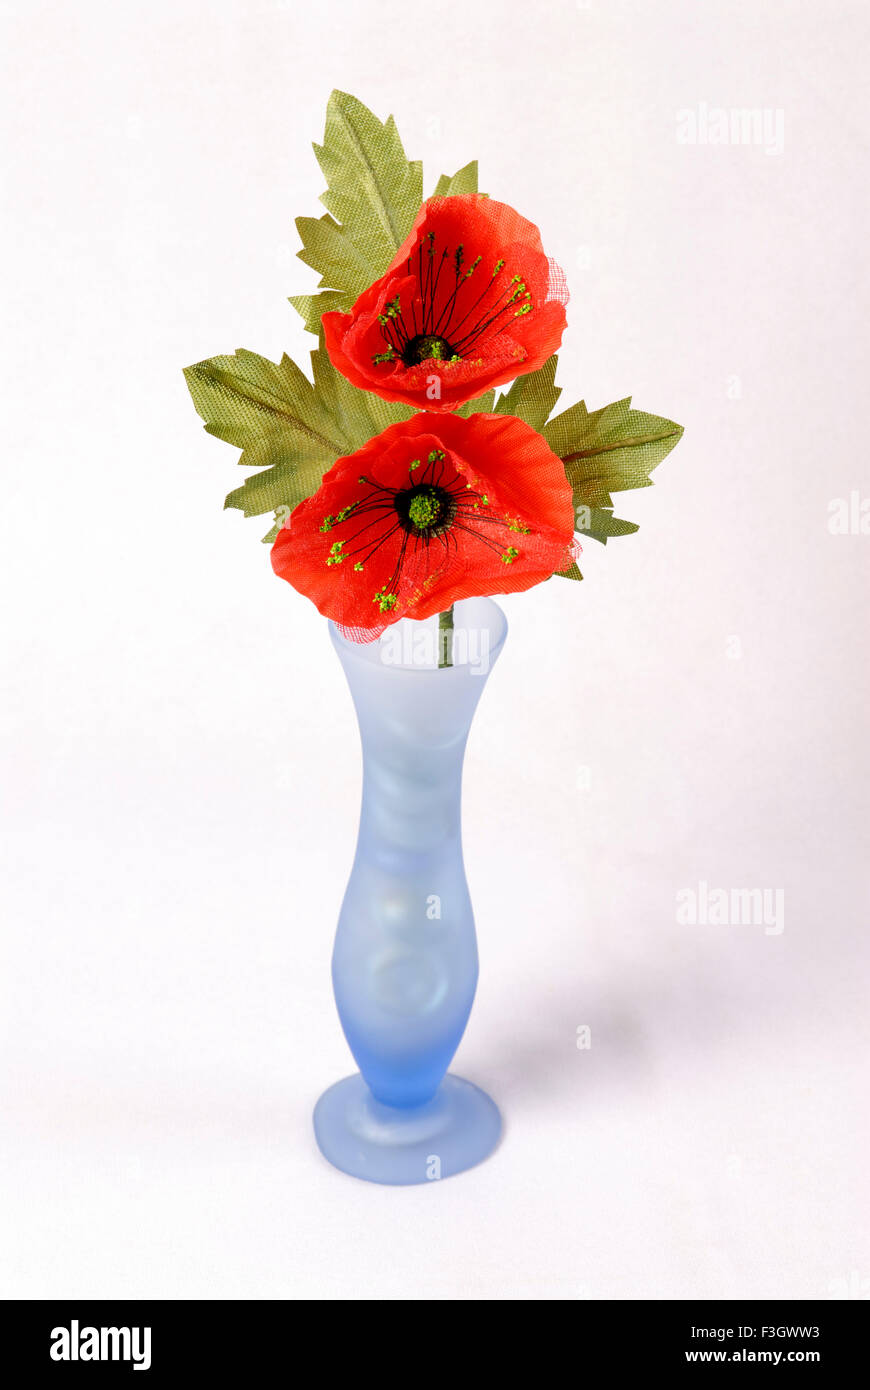 Artificial flowers poppy fake flower in sateen cloth, India, Asia Stock Photo